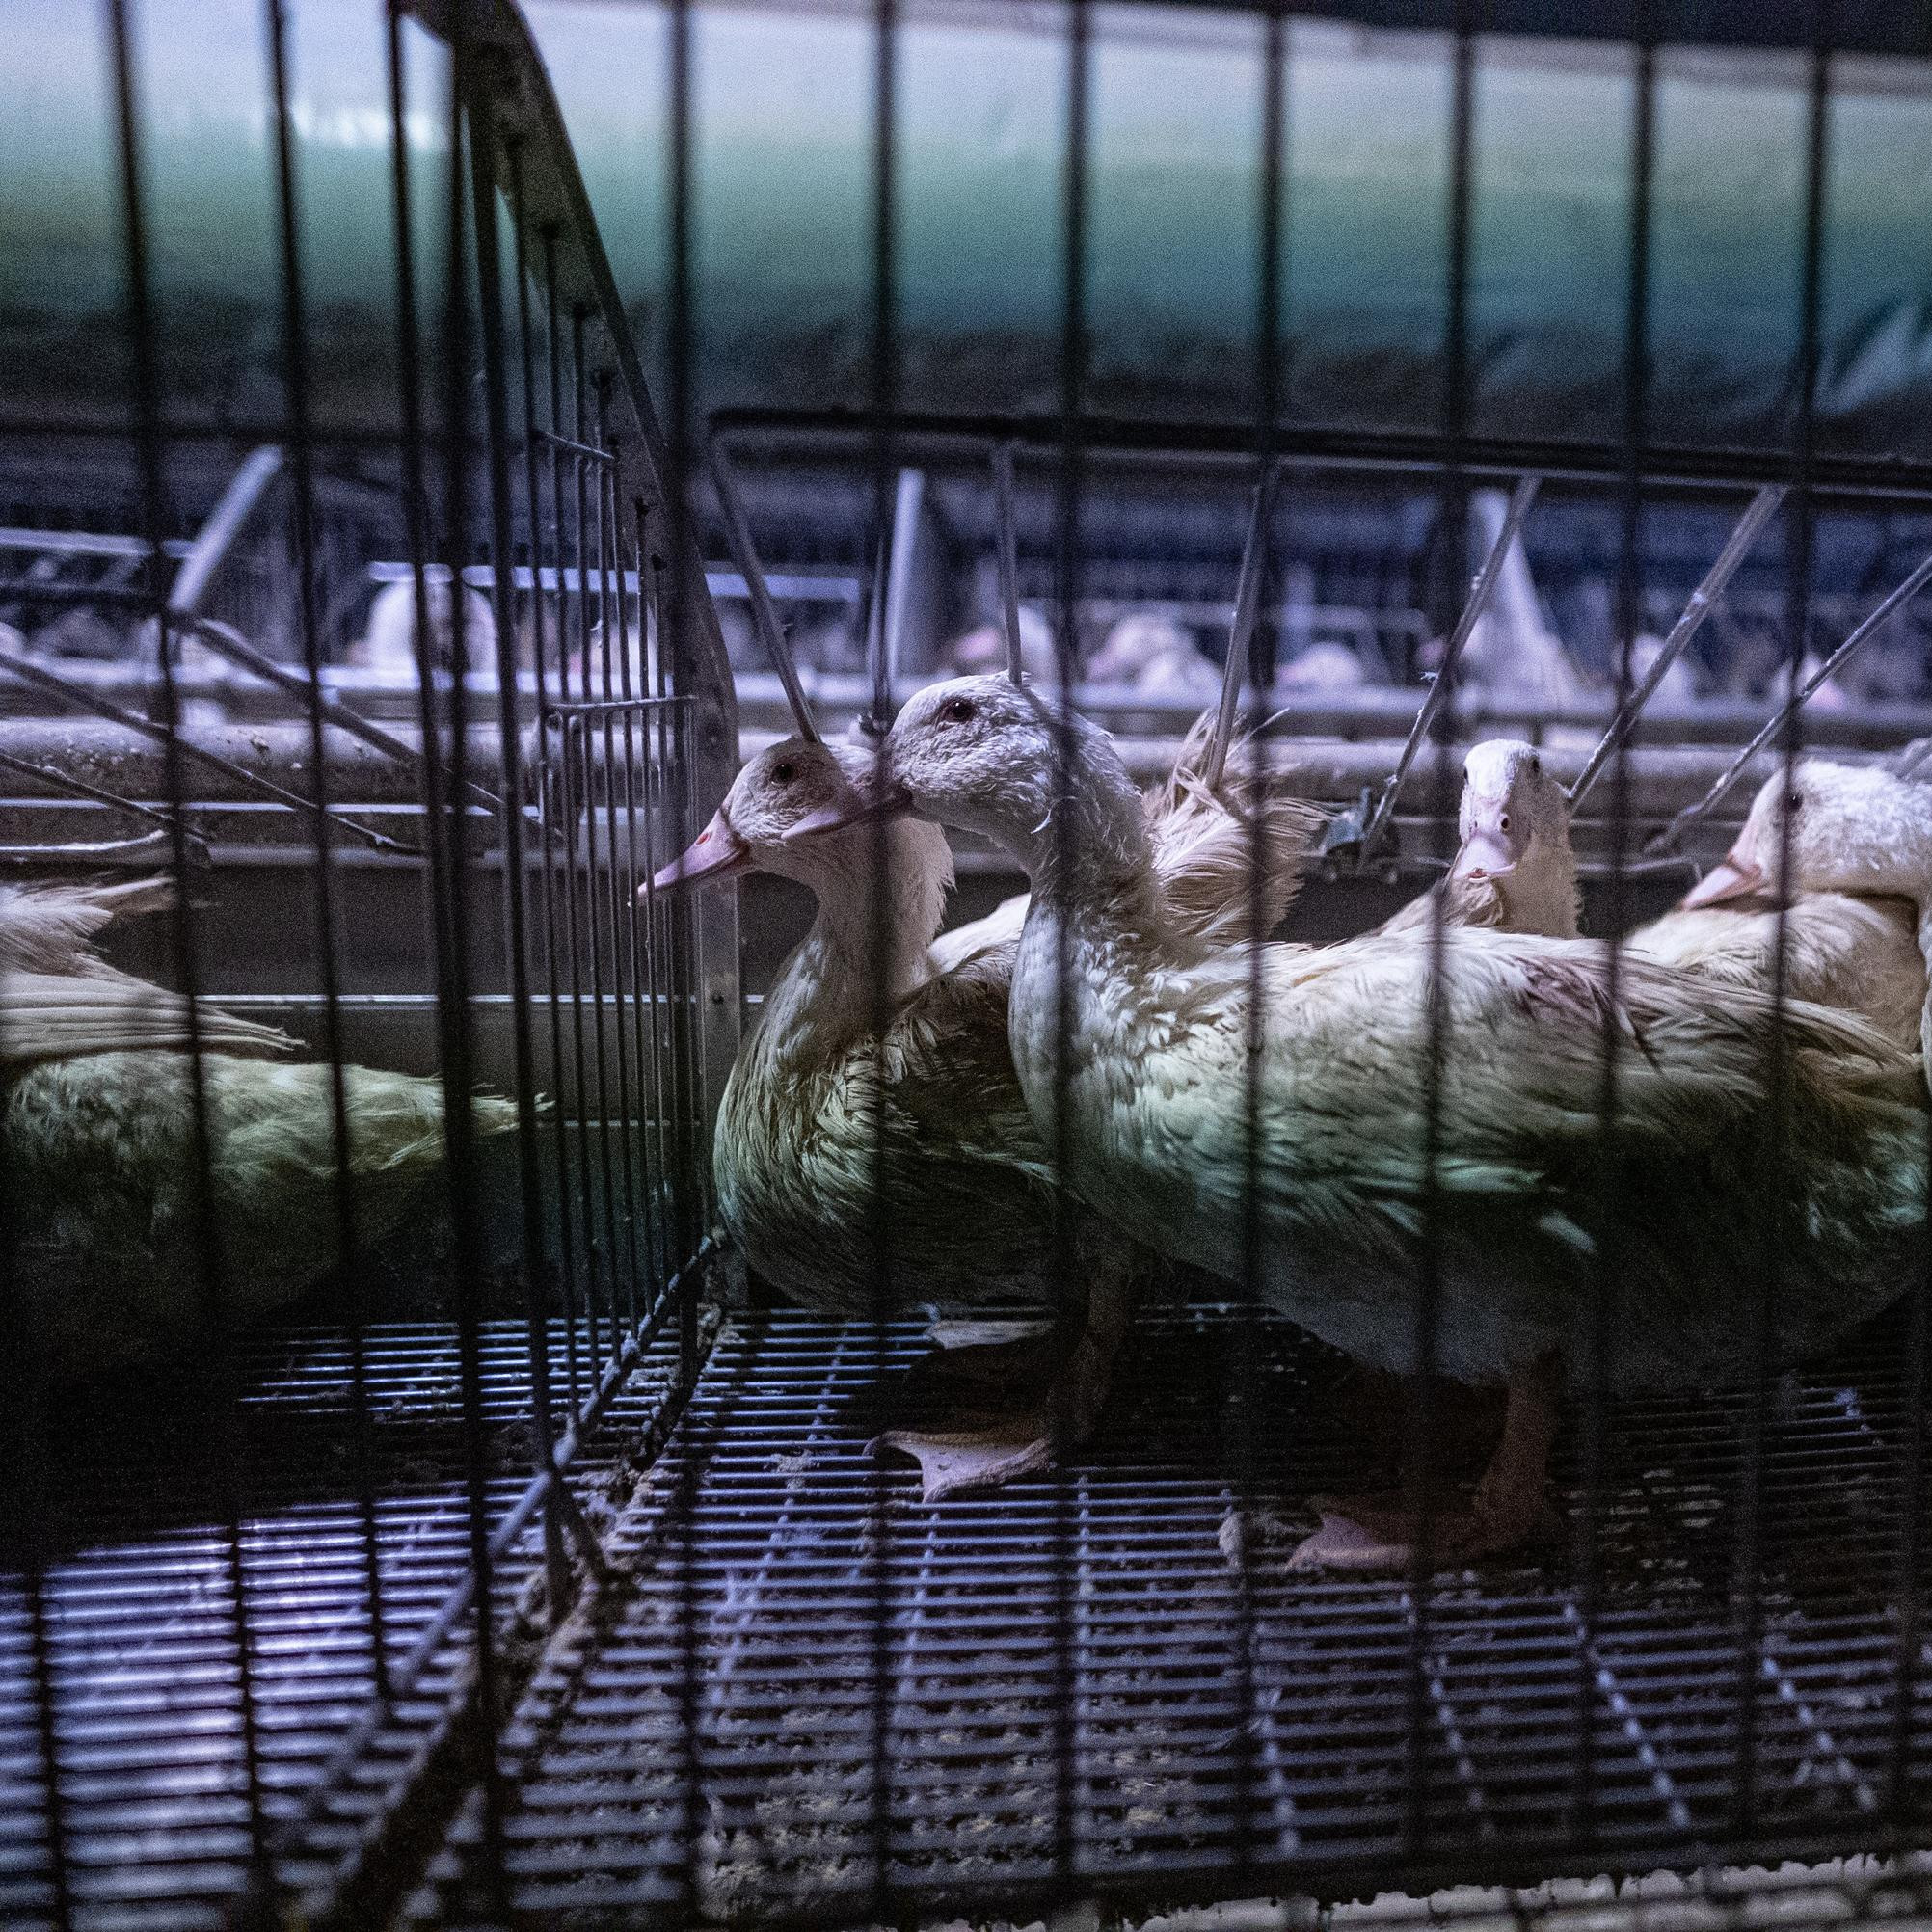 Ducks inside a cage without water